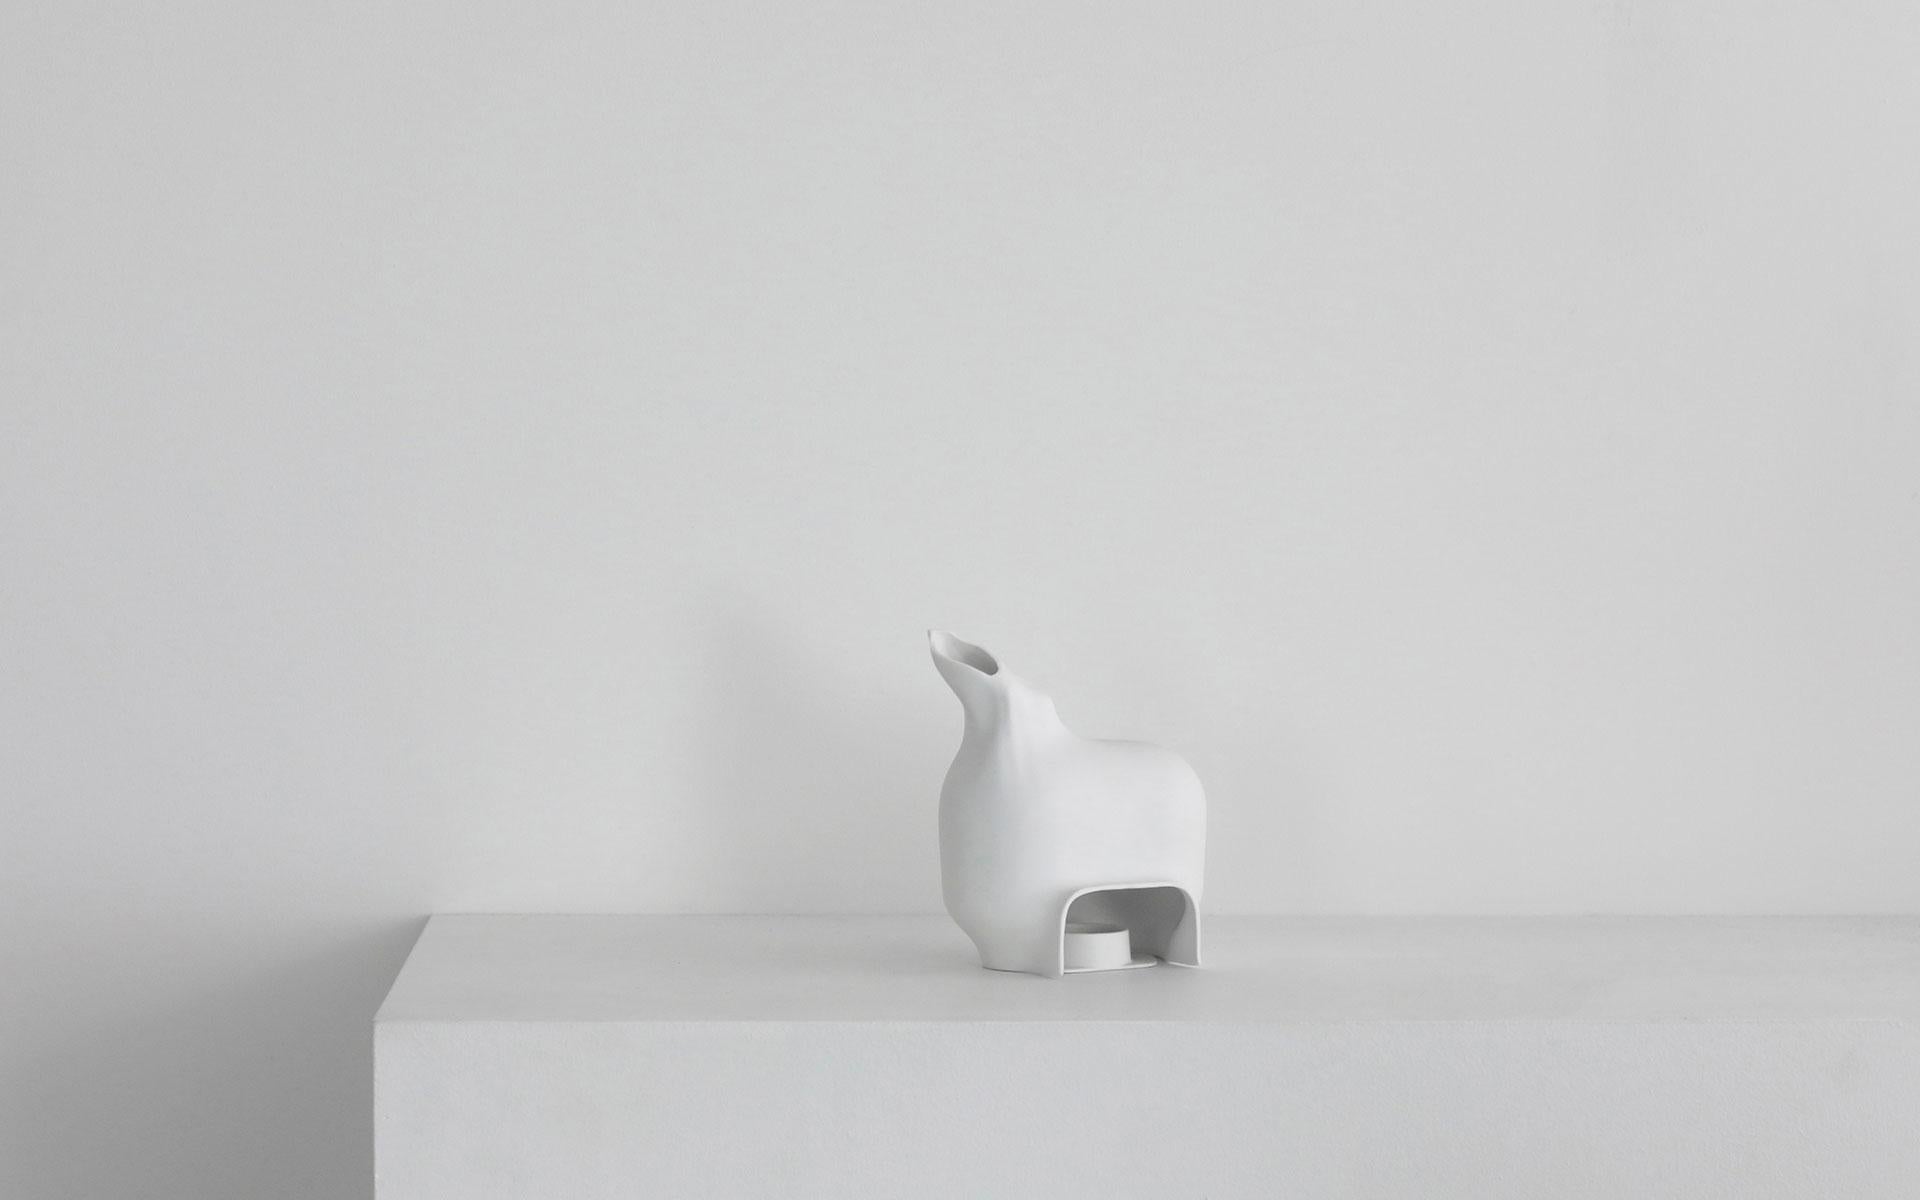 betweenShadows S Horizontal is a candle-holder in Limoges Porcelain Bisque.
This piece has two sizes (S and M) in horizontal or vertical versions each, everything sold individually. 

These candle holders are alcoves for dreaming. Covered in a